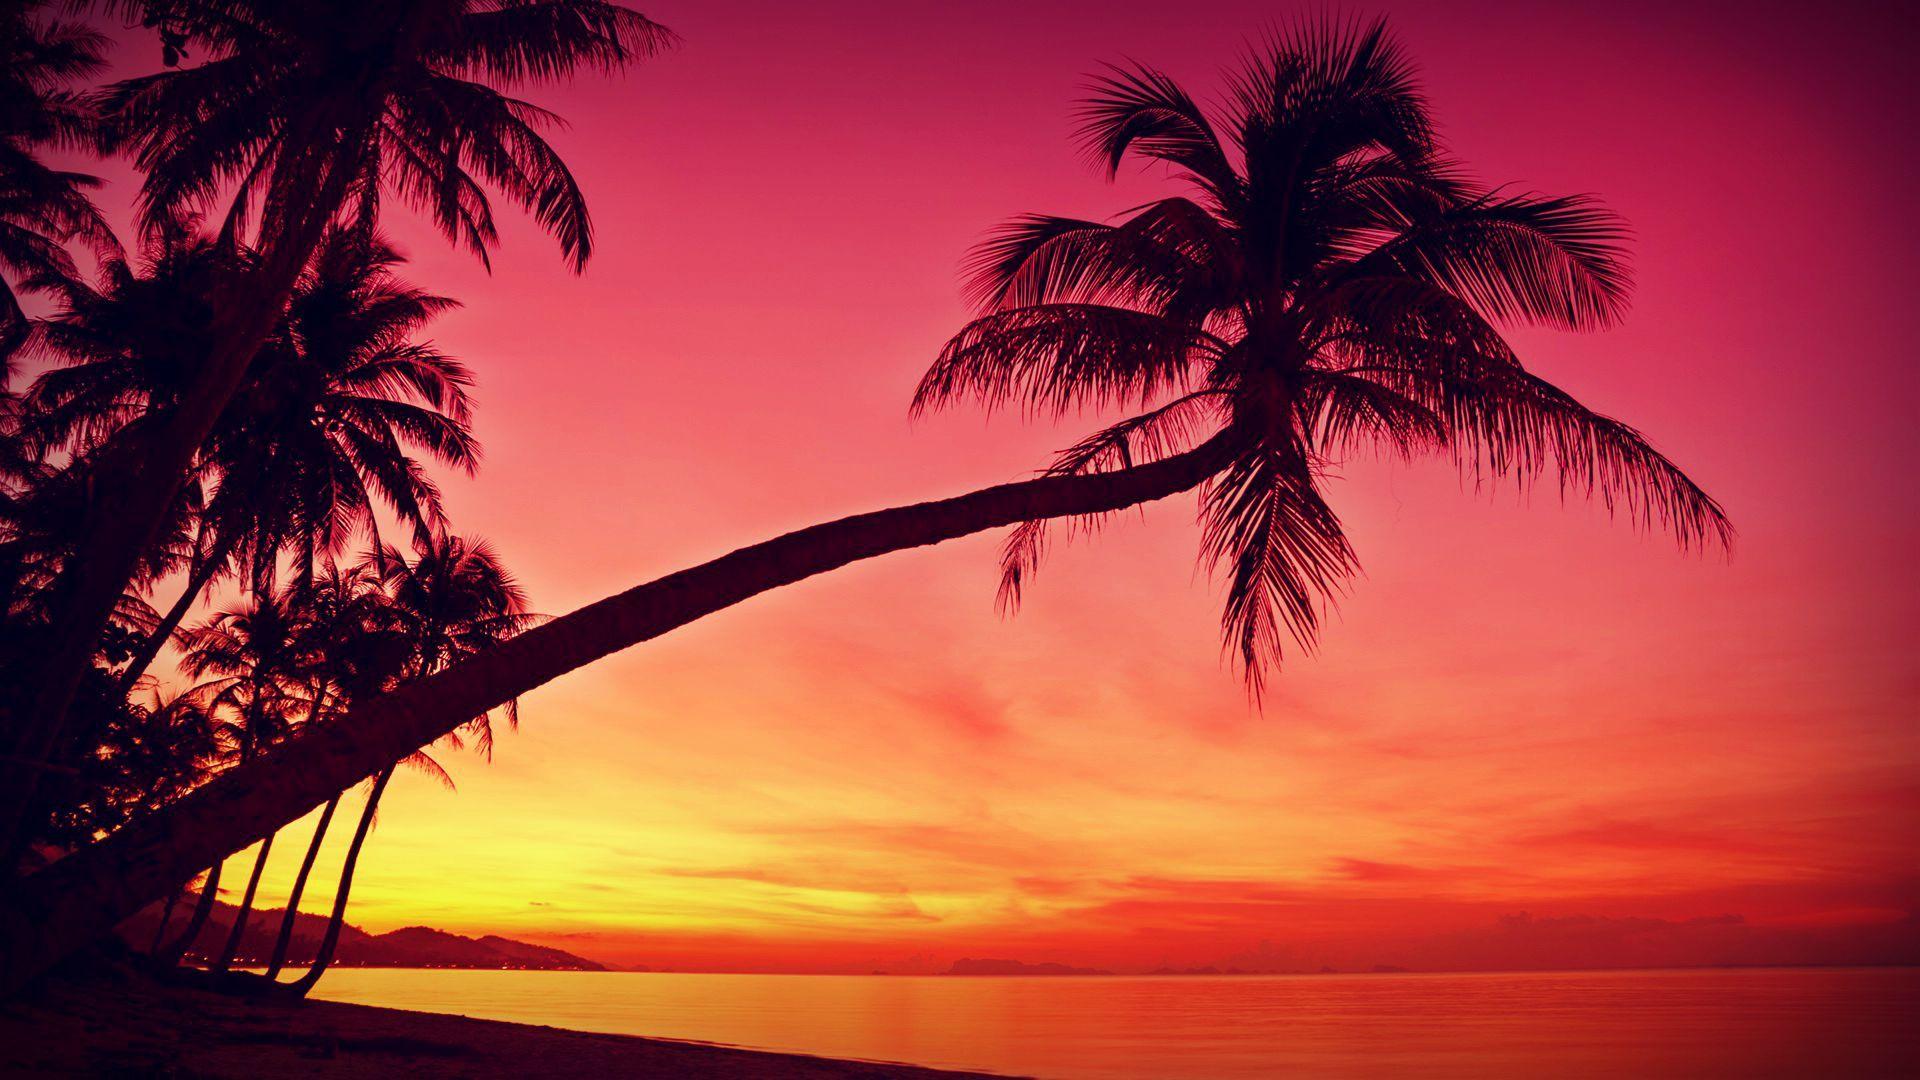 Sea Palm Tree Beach Colorful Sky Sunset Images Summer Hd Wallpaper   Wallpapers13com